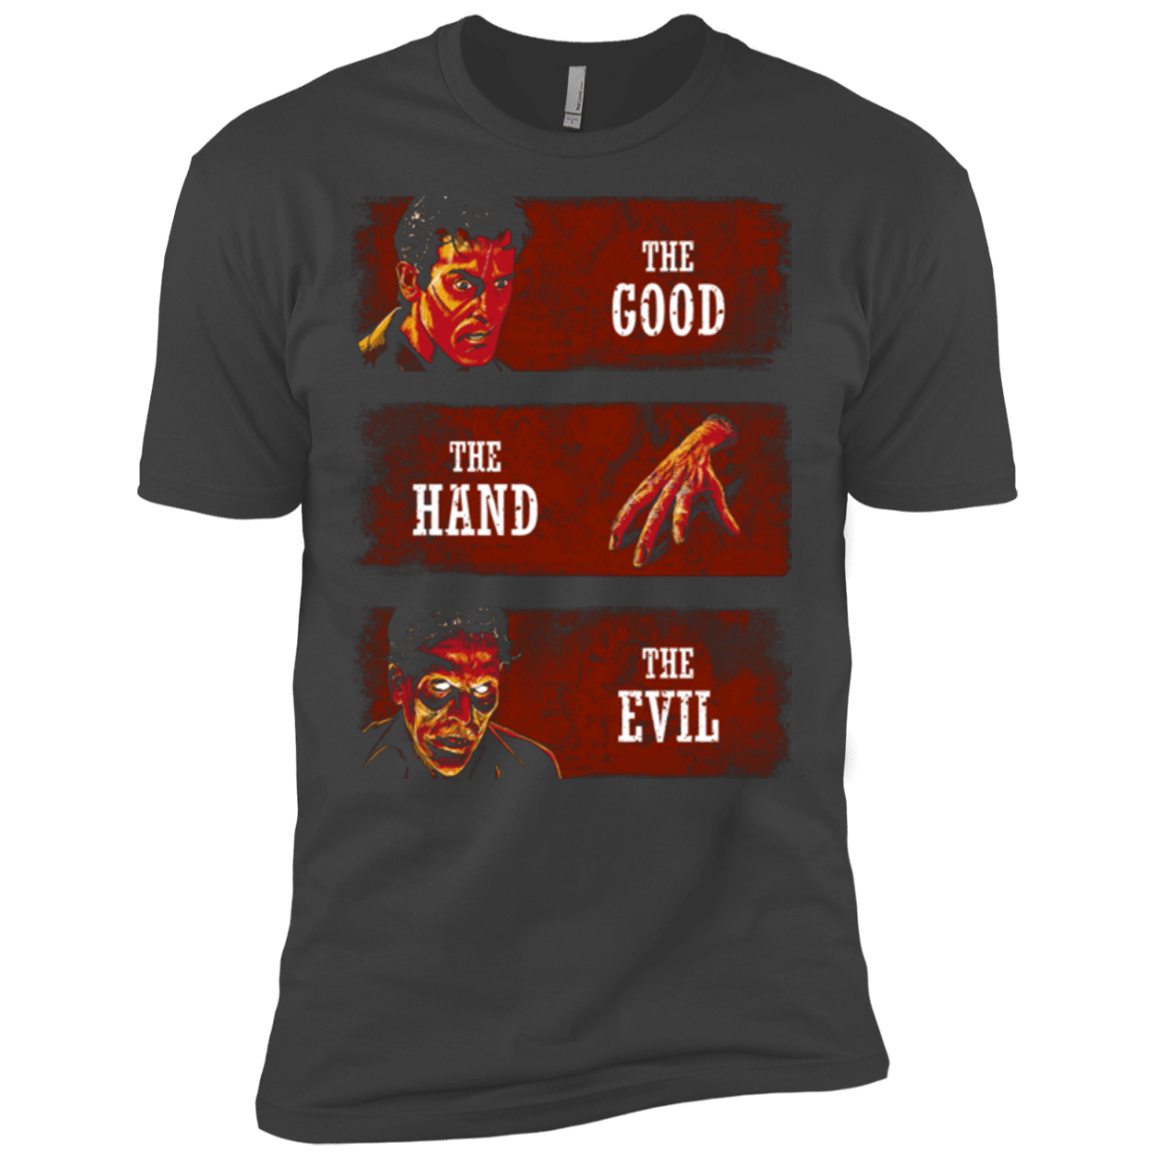 T-Shirts Heavy Metal / X-Small The Good the Hand and the Evil Men's Premium T-Shirt